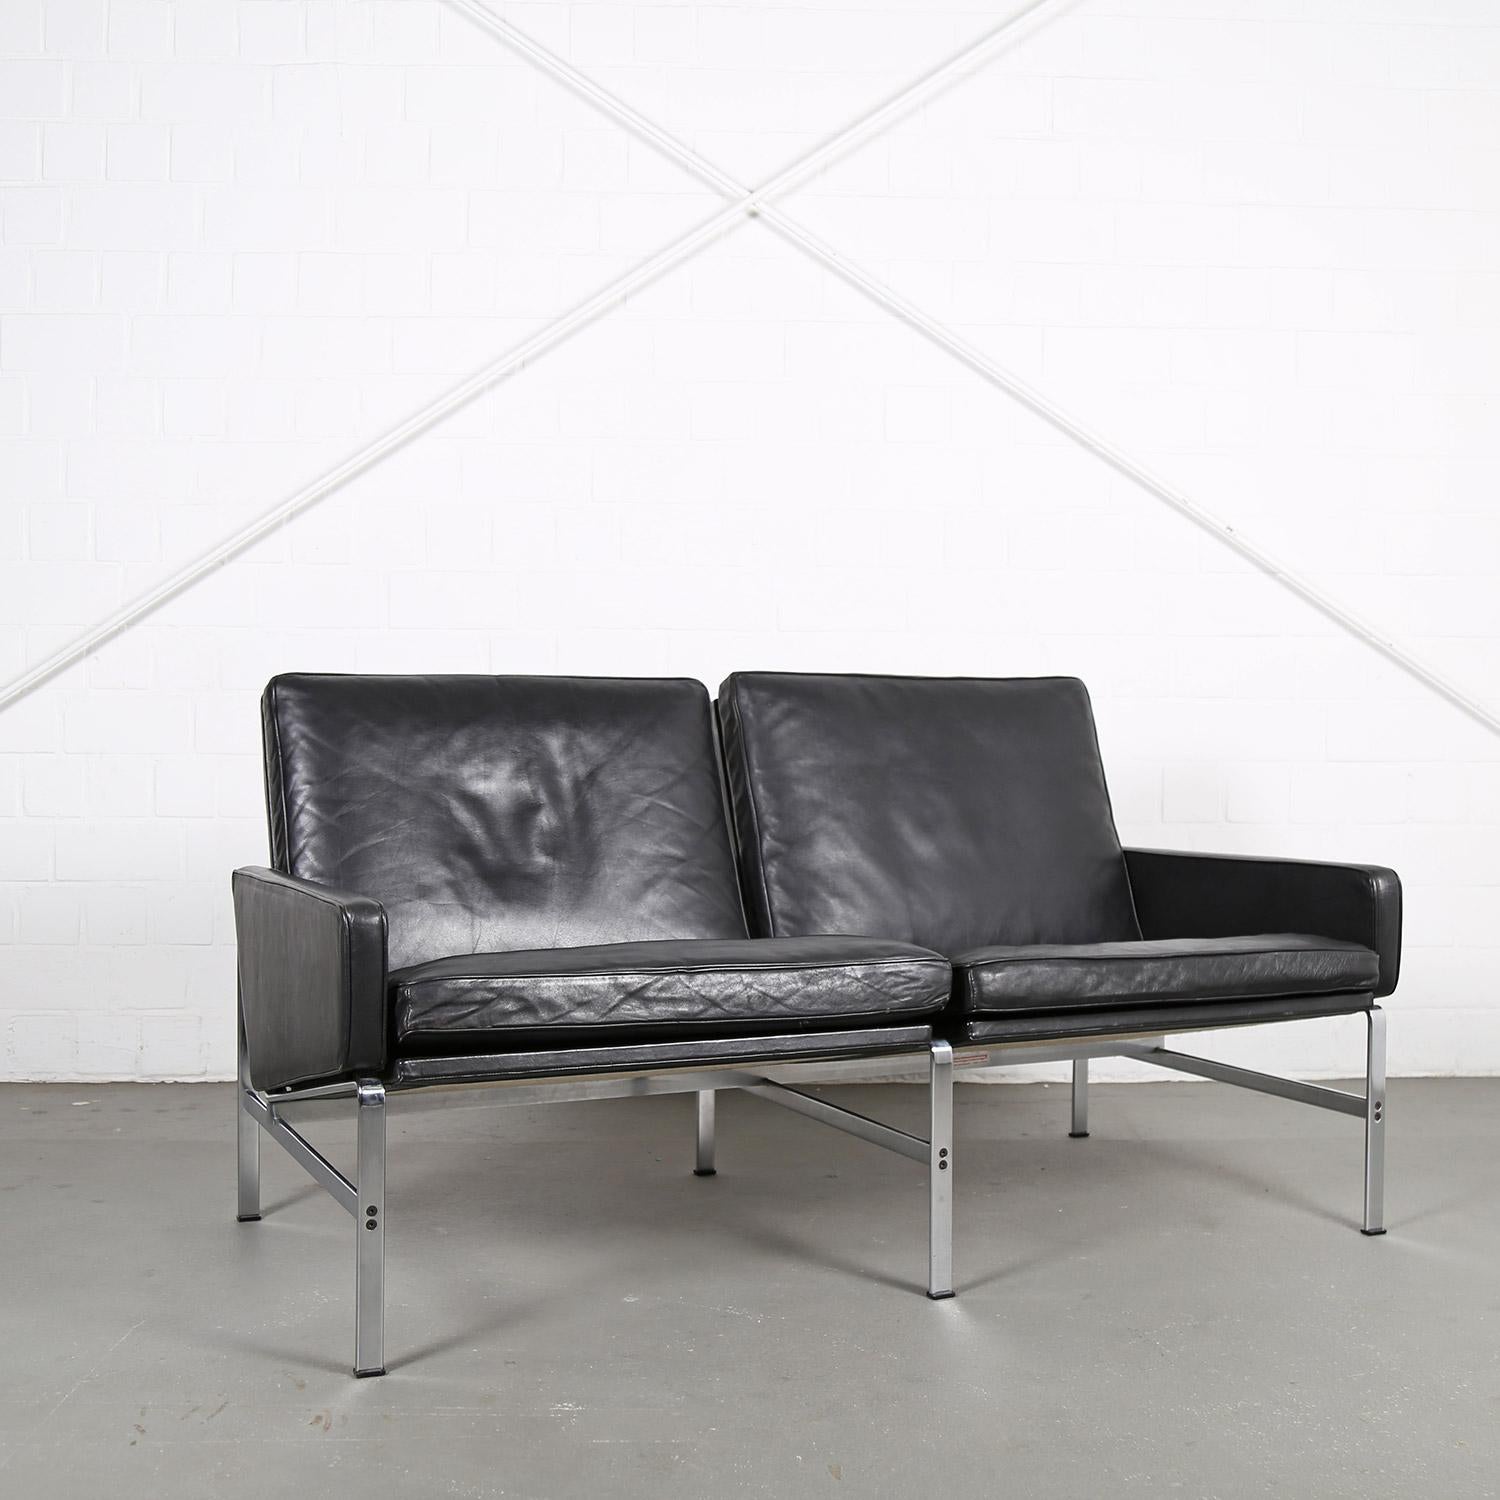 Danish leather 2-seater sofa model FK6722 designed by Preben Fabricius and Jørgen Kastholm for Kill International in the 60s. Heavy quality and unique processing consisting of high-quality materials. Two matching armchairs also